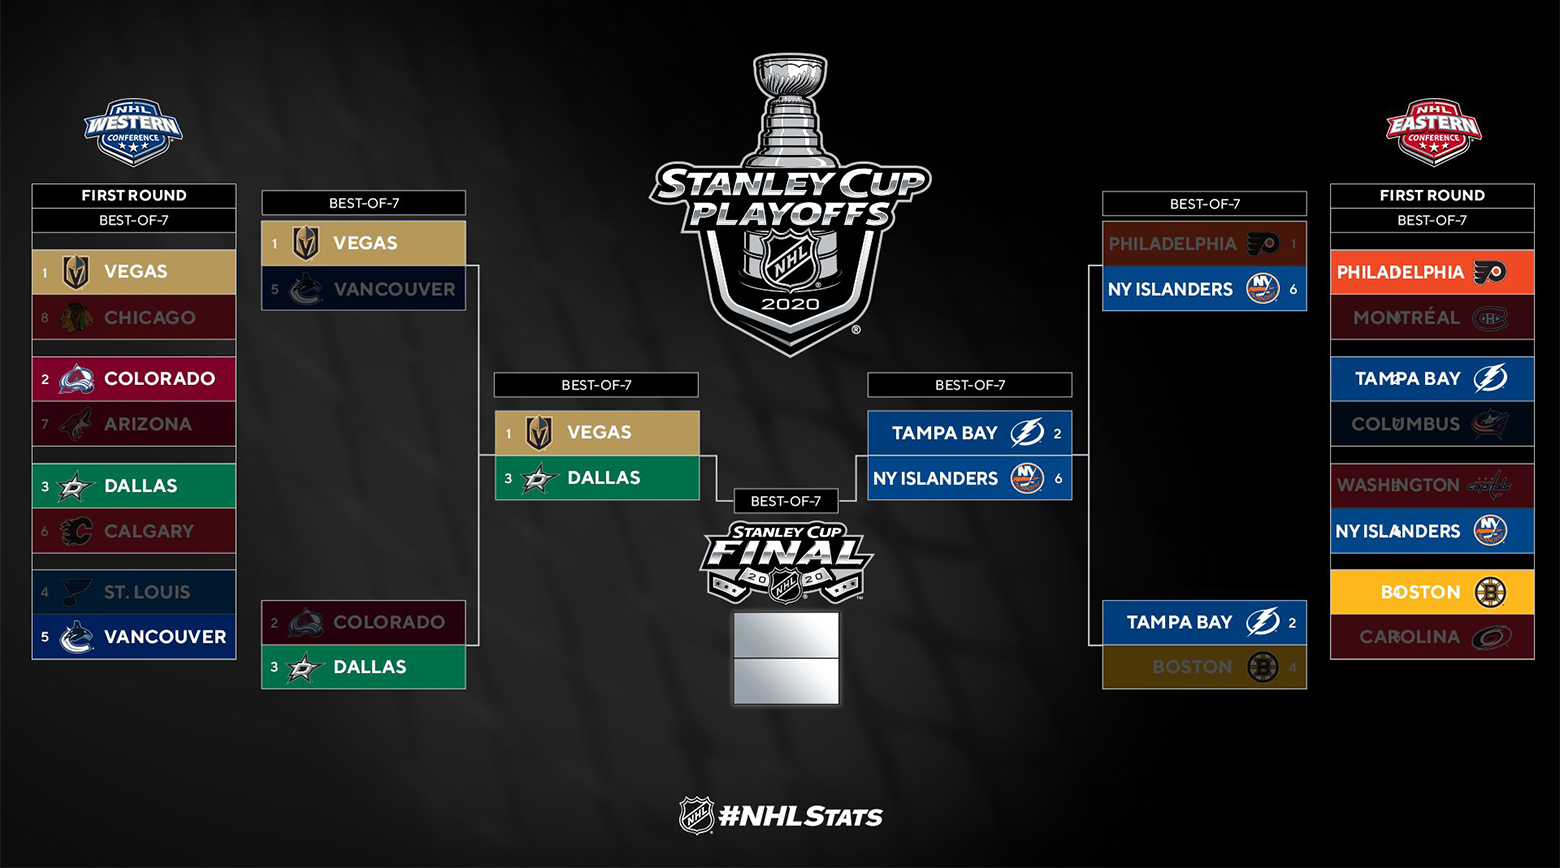 2020 NHL playoffs: Conference Finals schedule, predictions and analysis